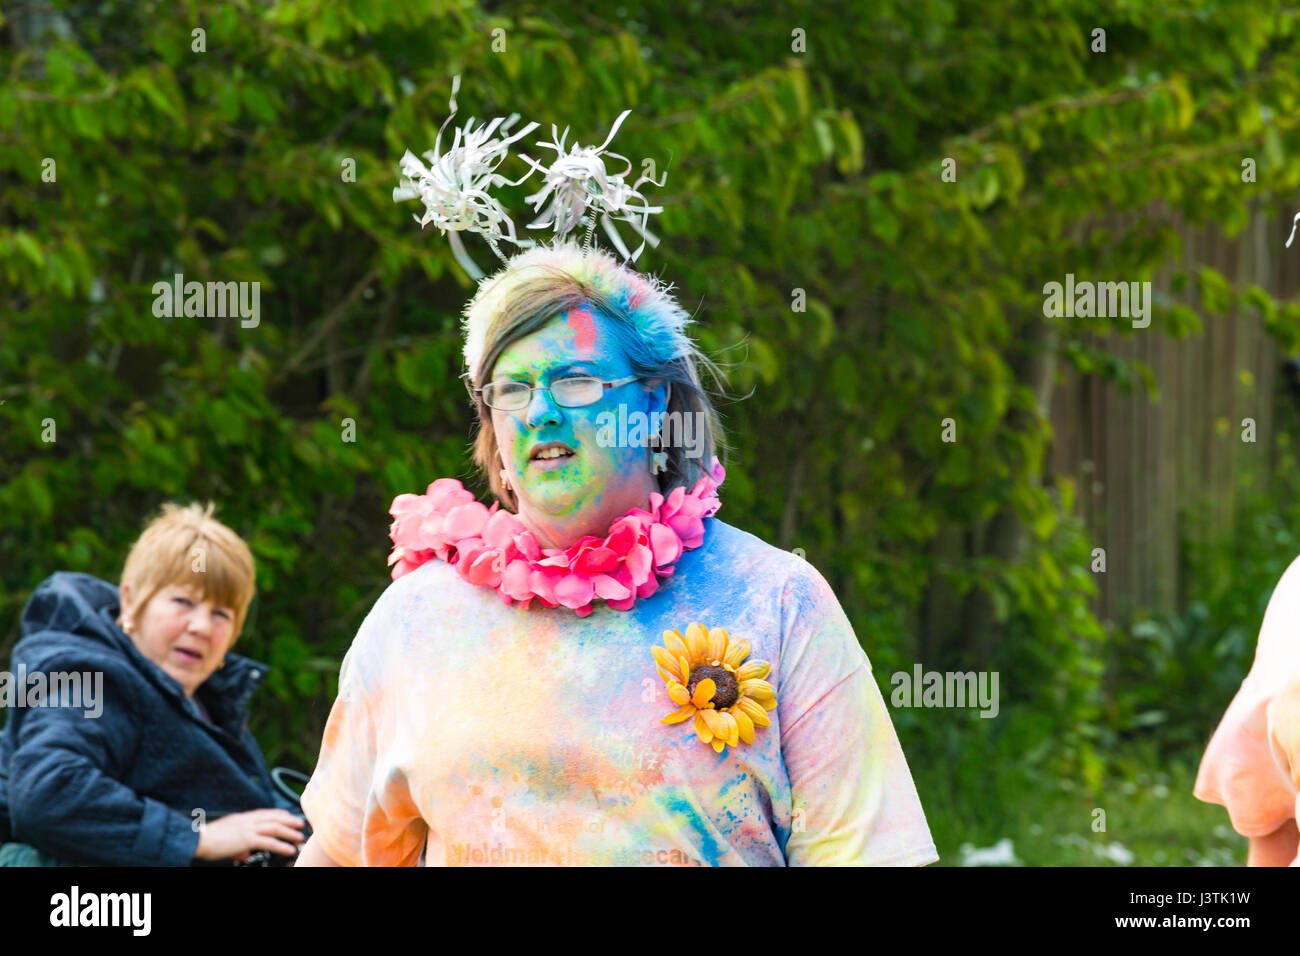 Weymouth, Dorset, UK. 6th May, 2017. Weldmar's Colour Run takes place at Weymouth to raise funds for the charity. Families participate in the event an Stock Photo